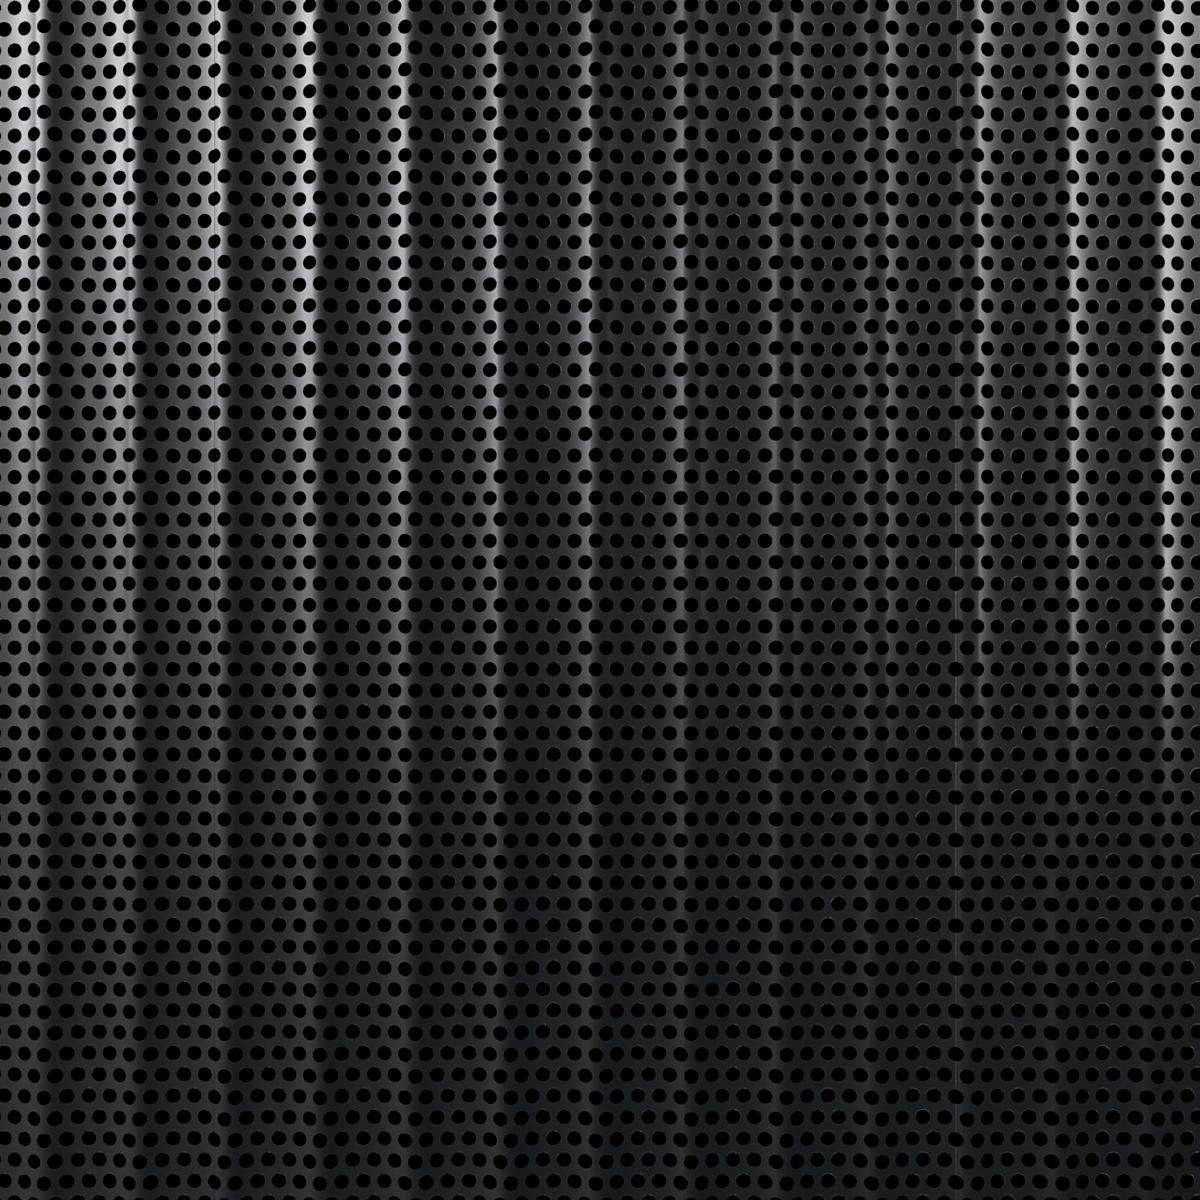 PERFORATED-CORRUGATED-38-34-BLACK-GLOSSY